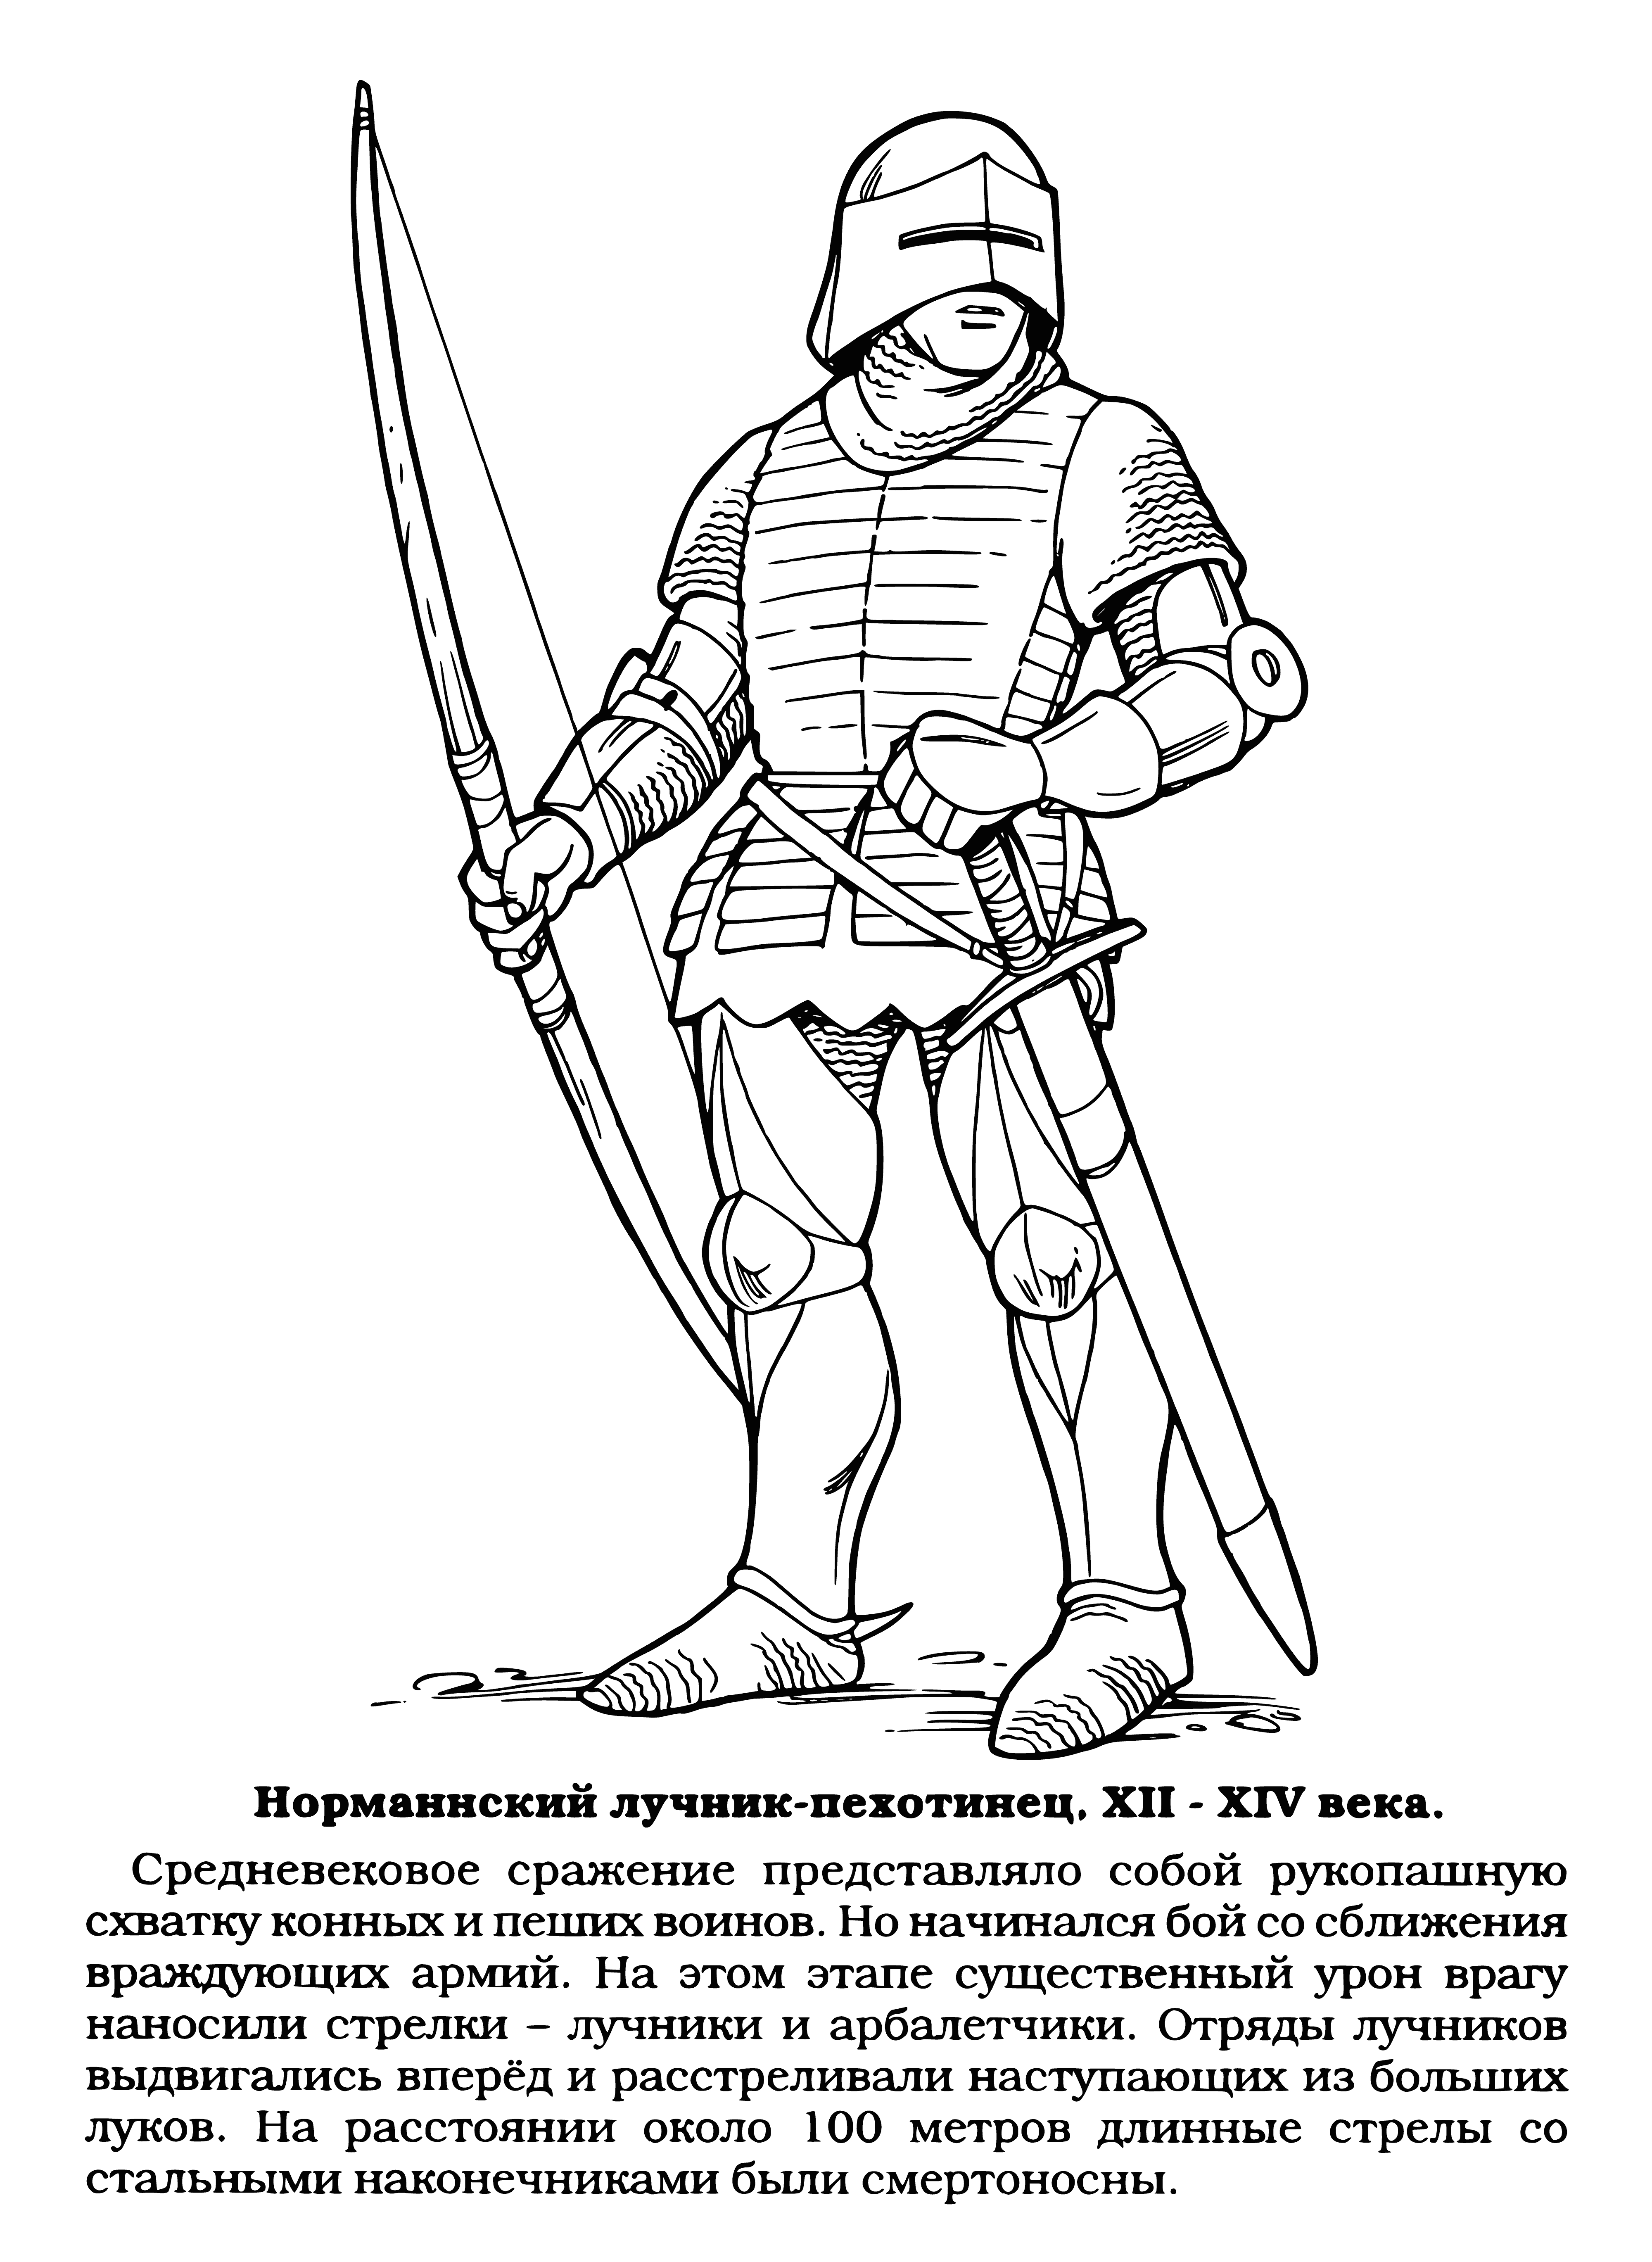 Norman archer coloring page